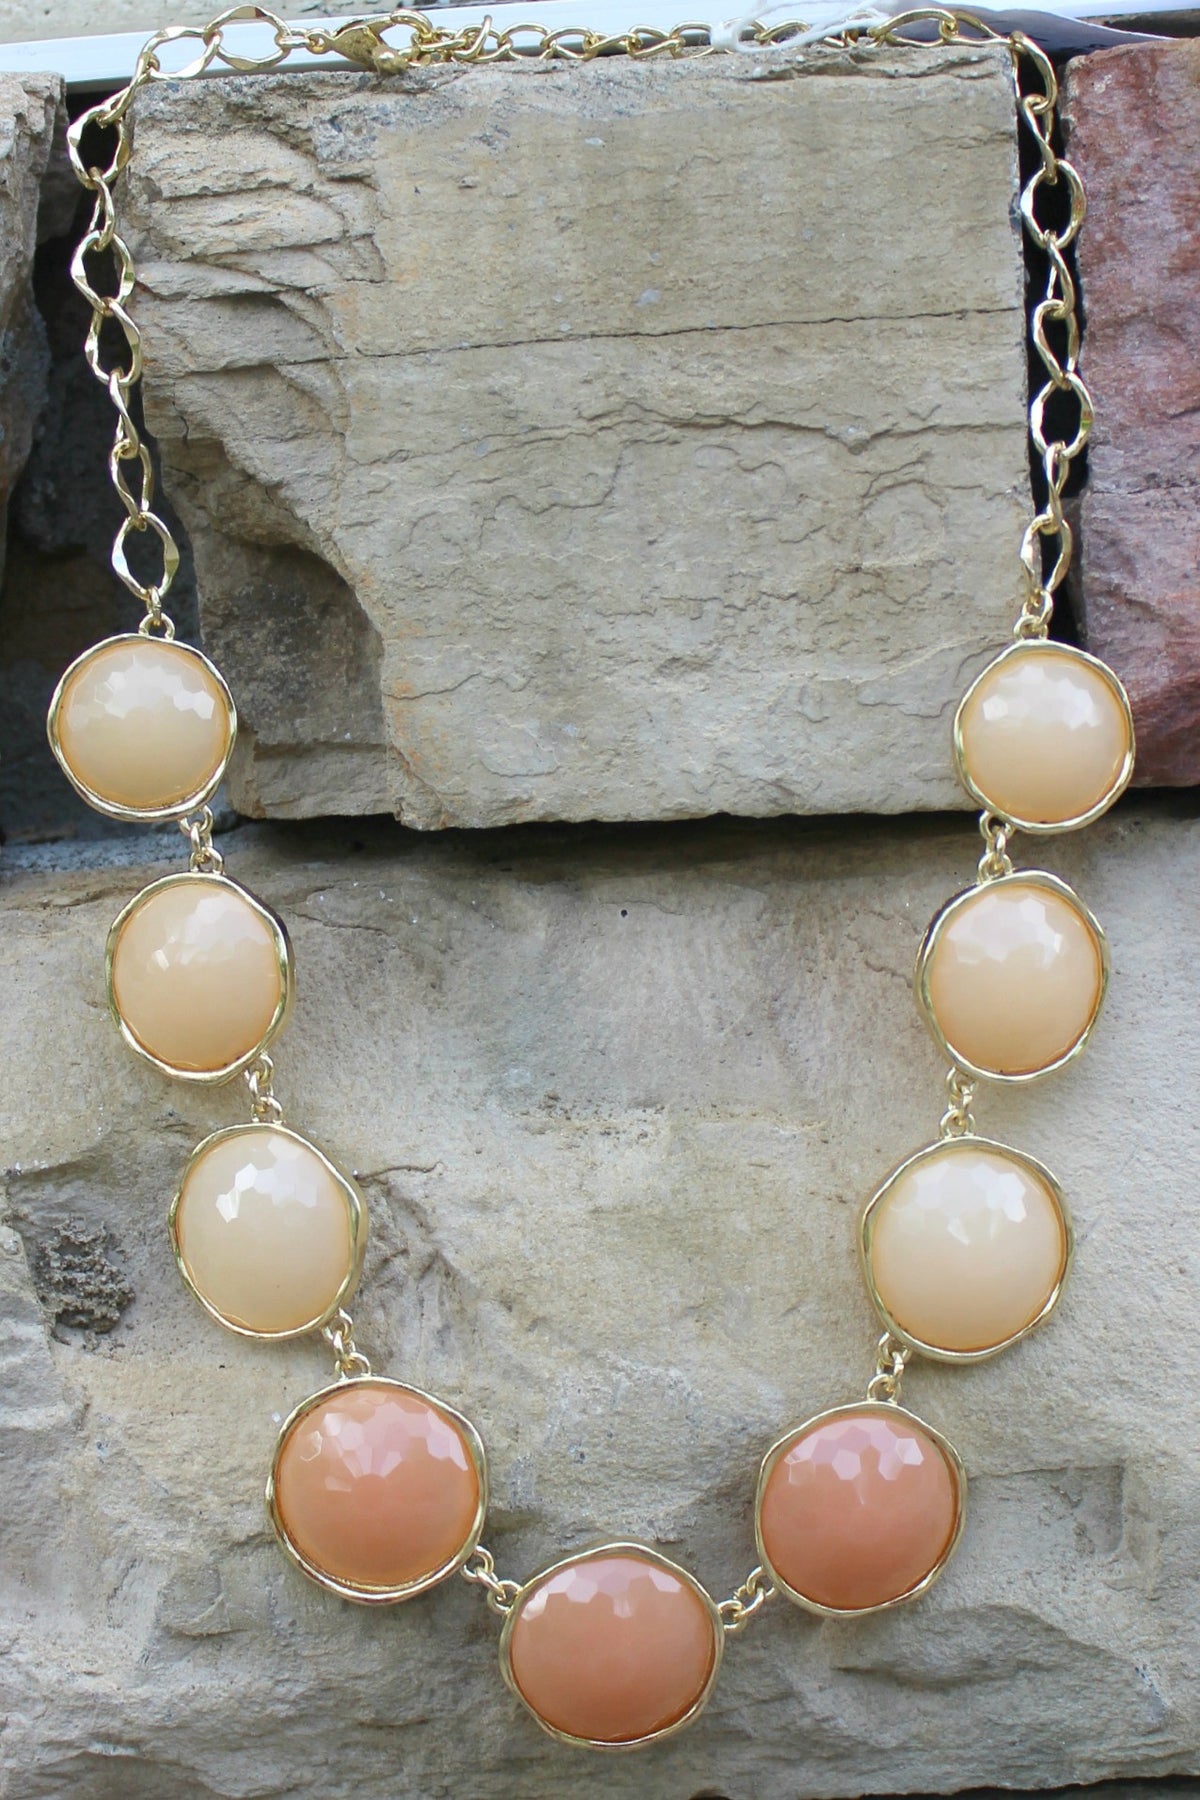 Blended Tone Necklace, Nude